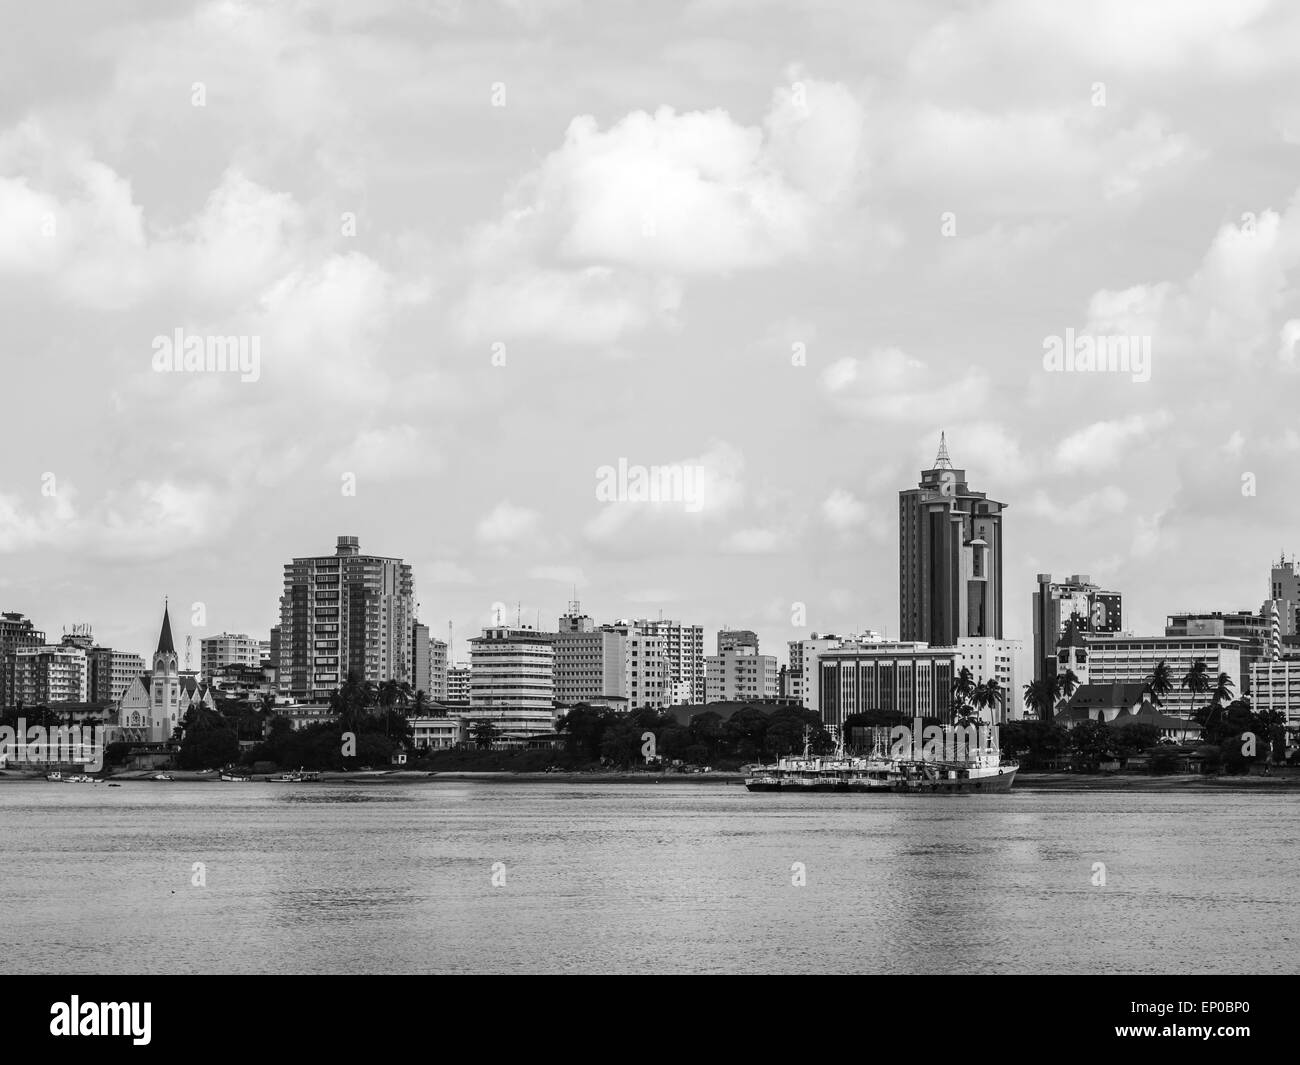 Waterfront of Dar es Salaam, Tanzania in East Africa, with modern architecture, seen from a boat. Horizontal, black and white. Stock Photo